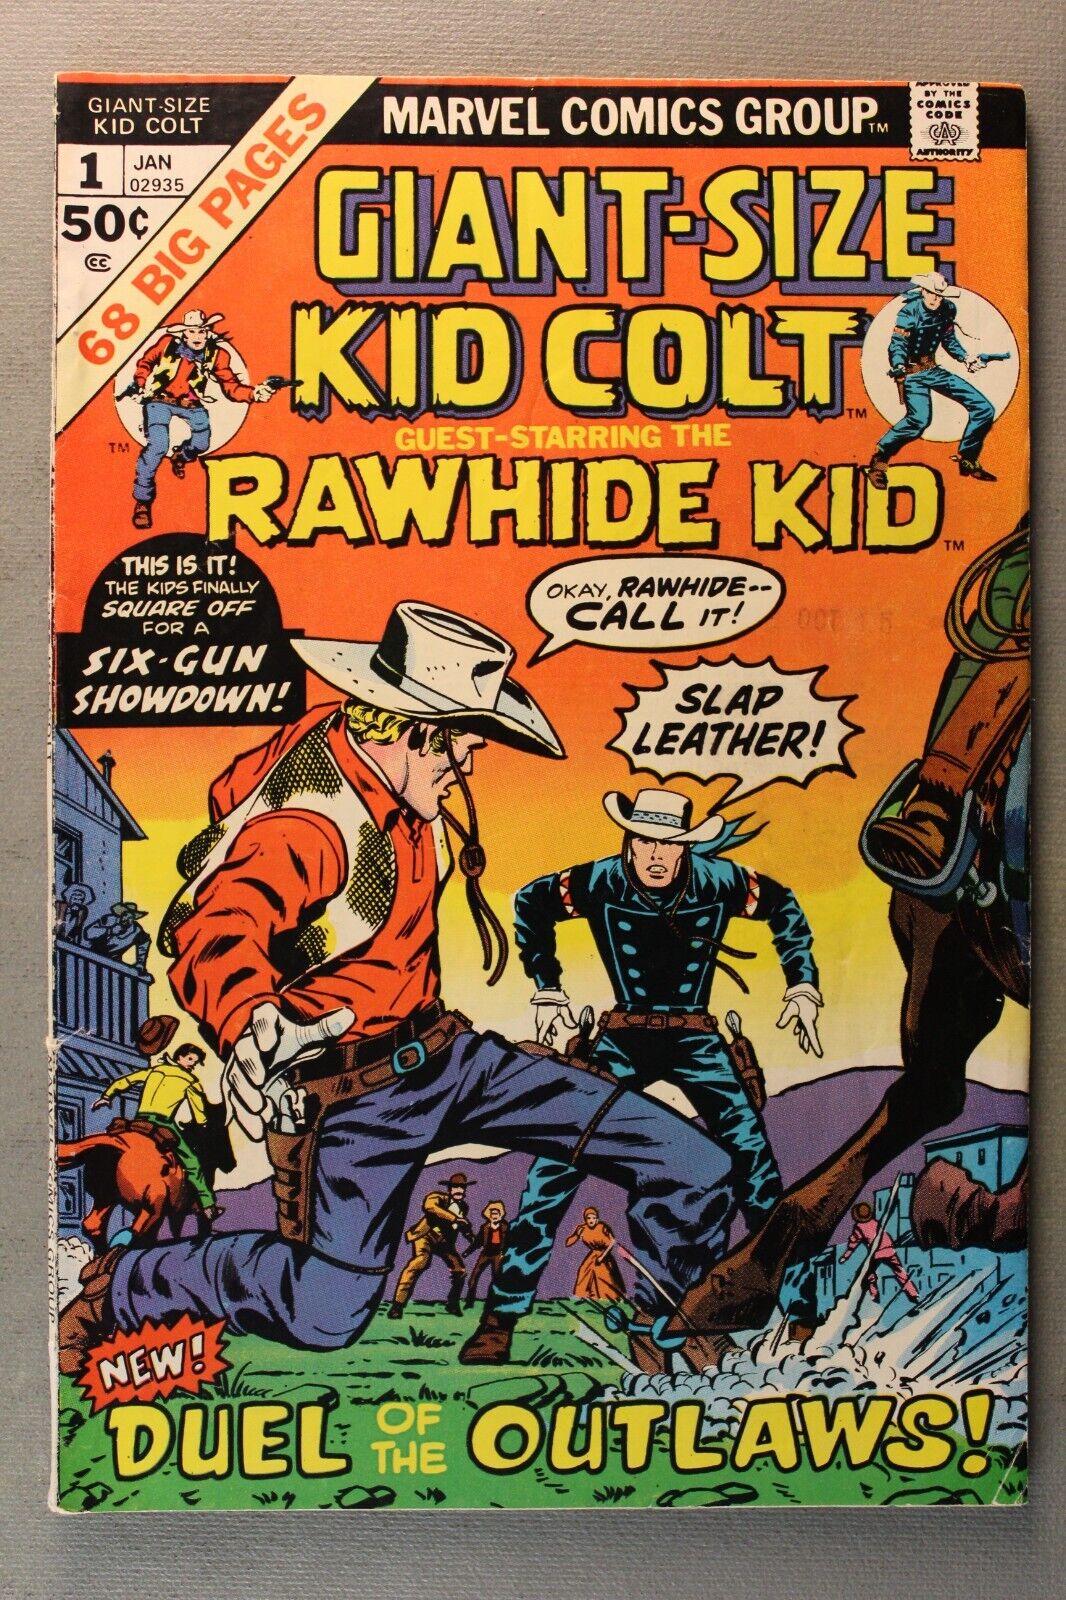 GIANT-SIZE KID COLT #1 Guest-Starring The Rawhide Kid #1975* Not High Grade